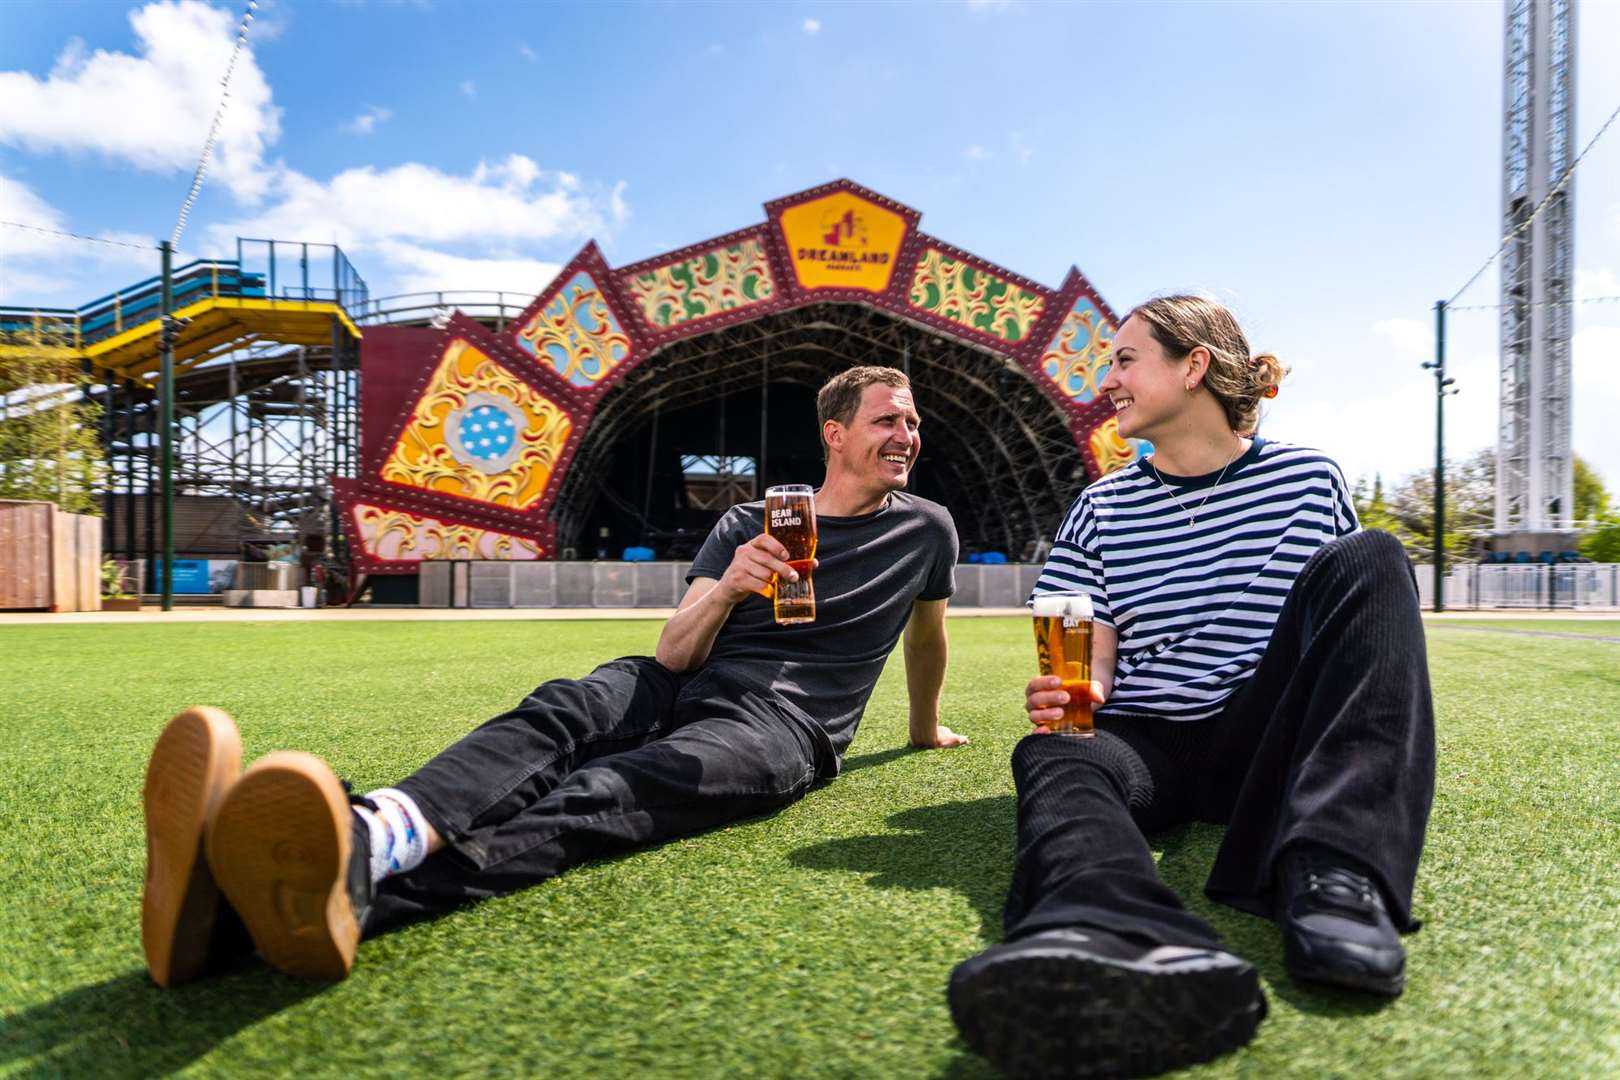 Shepherd Neame has teamed up with Dreamland for the Summer Social